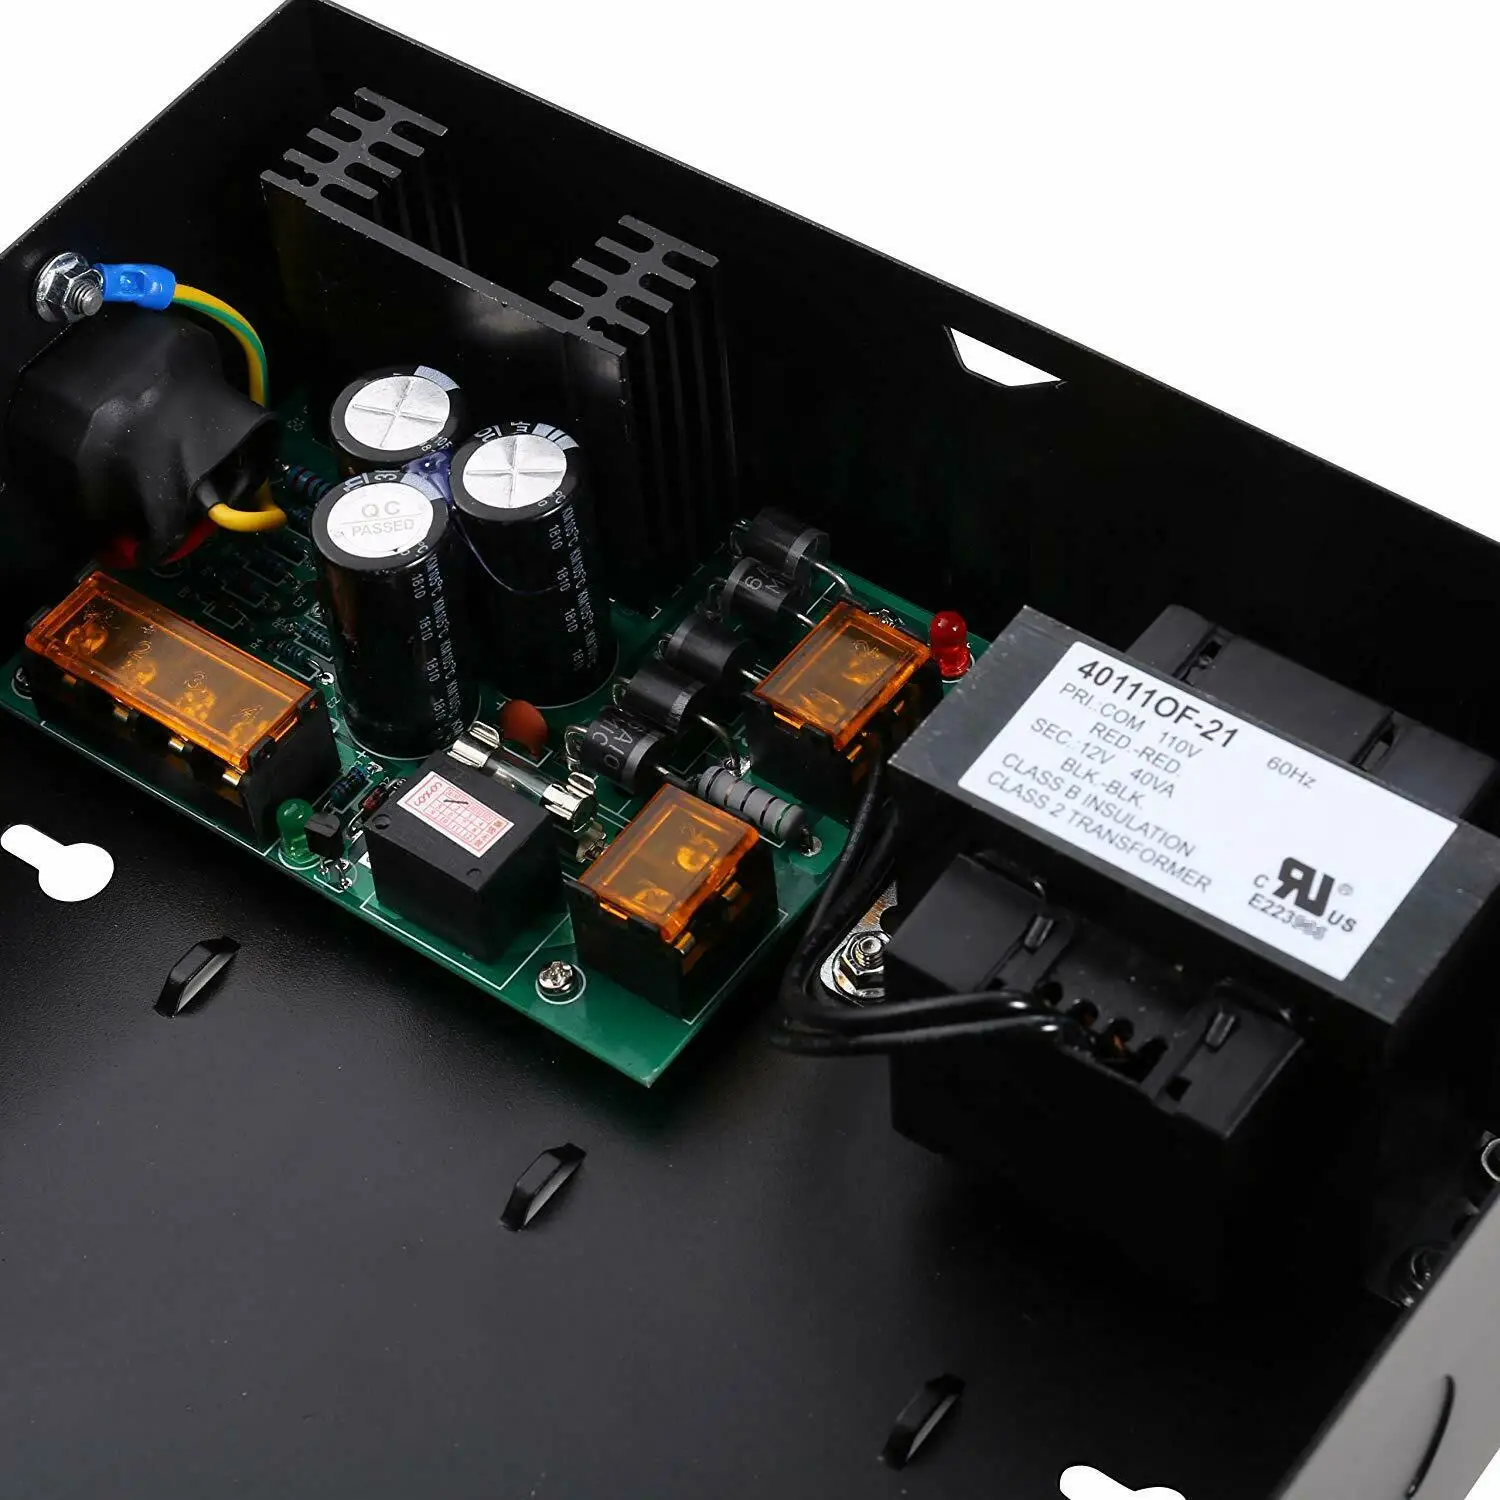 Power Supply Converter Input AC220V Output 12VDC 3.5A for Access Control Board. 